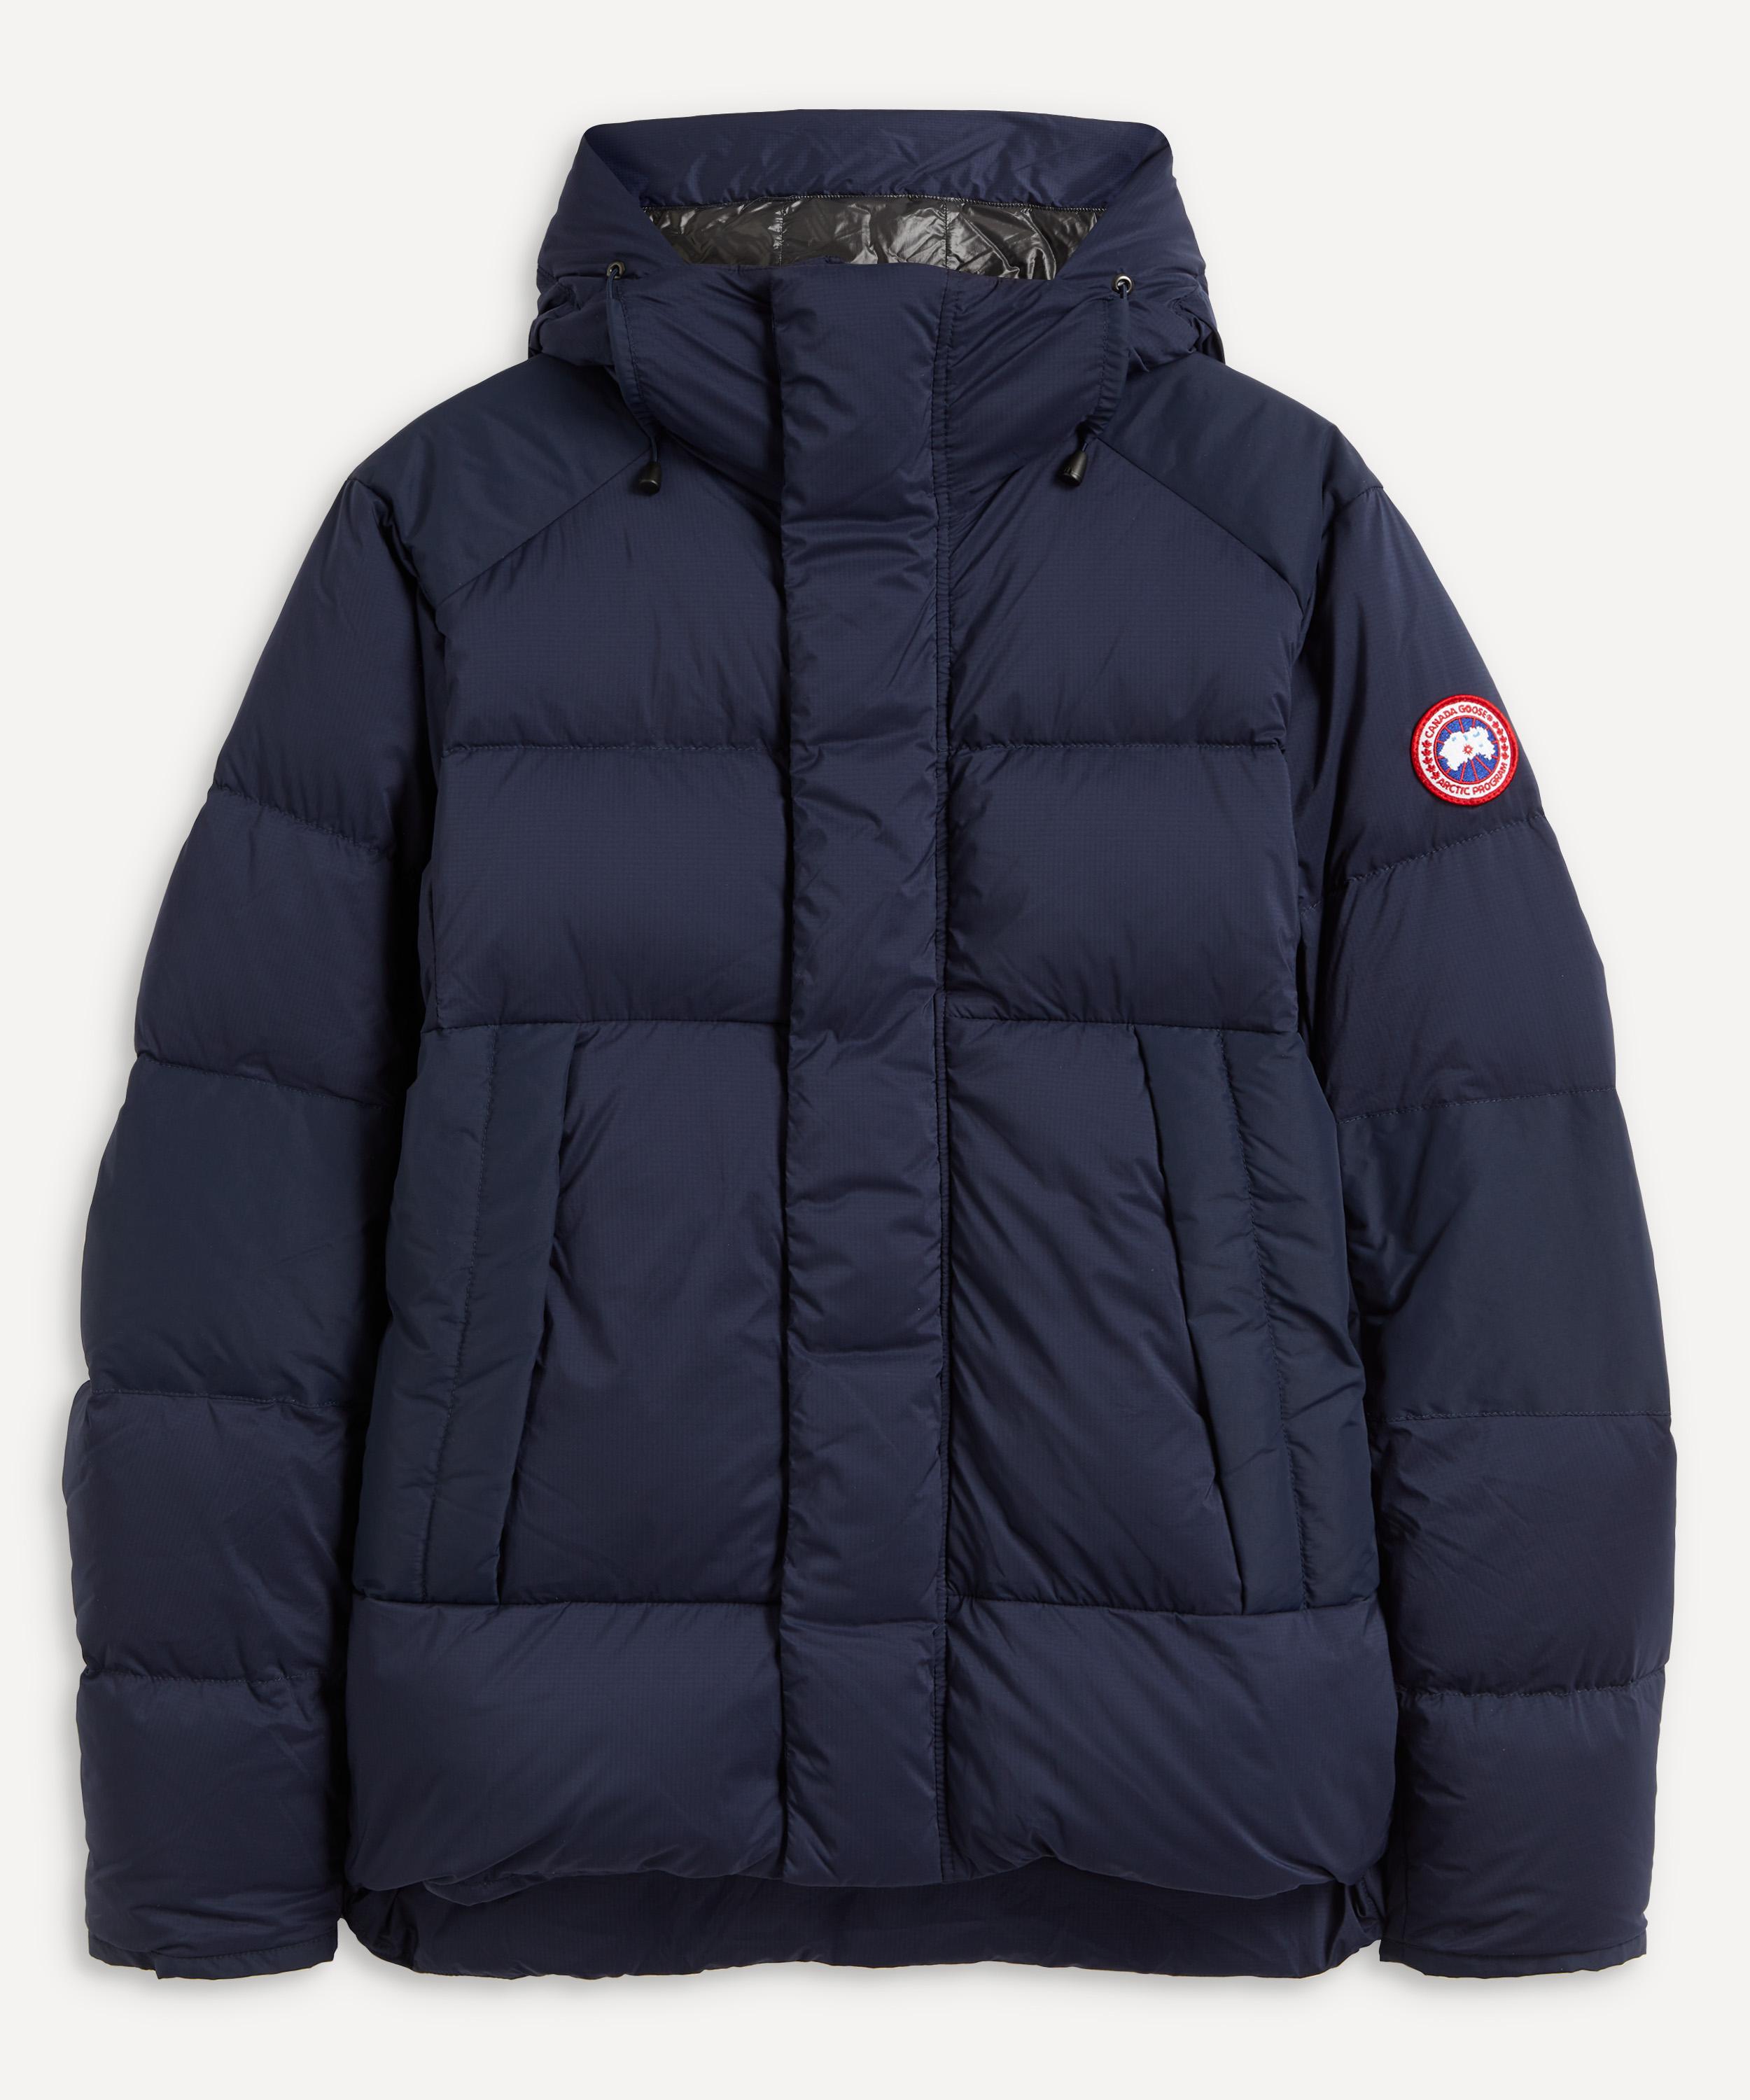 CANADA GOOSE ARMSTRONG HOODED JACKET,000735952